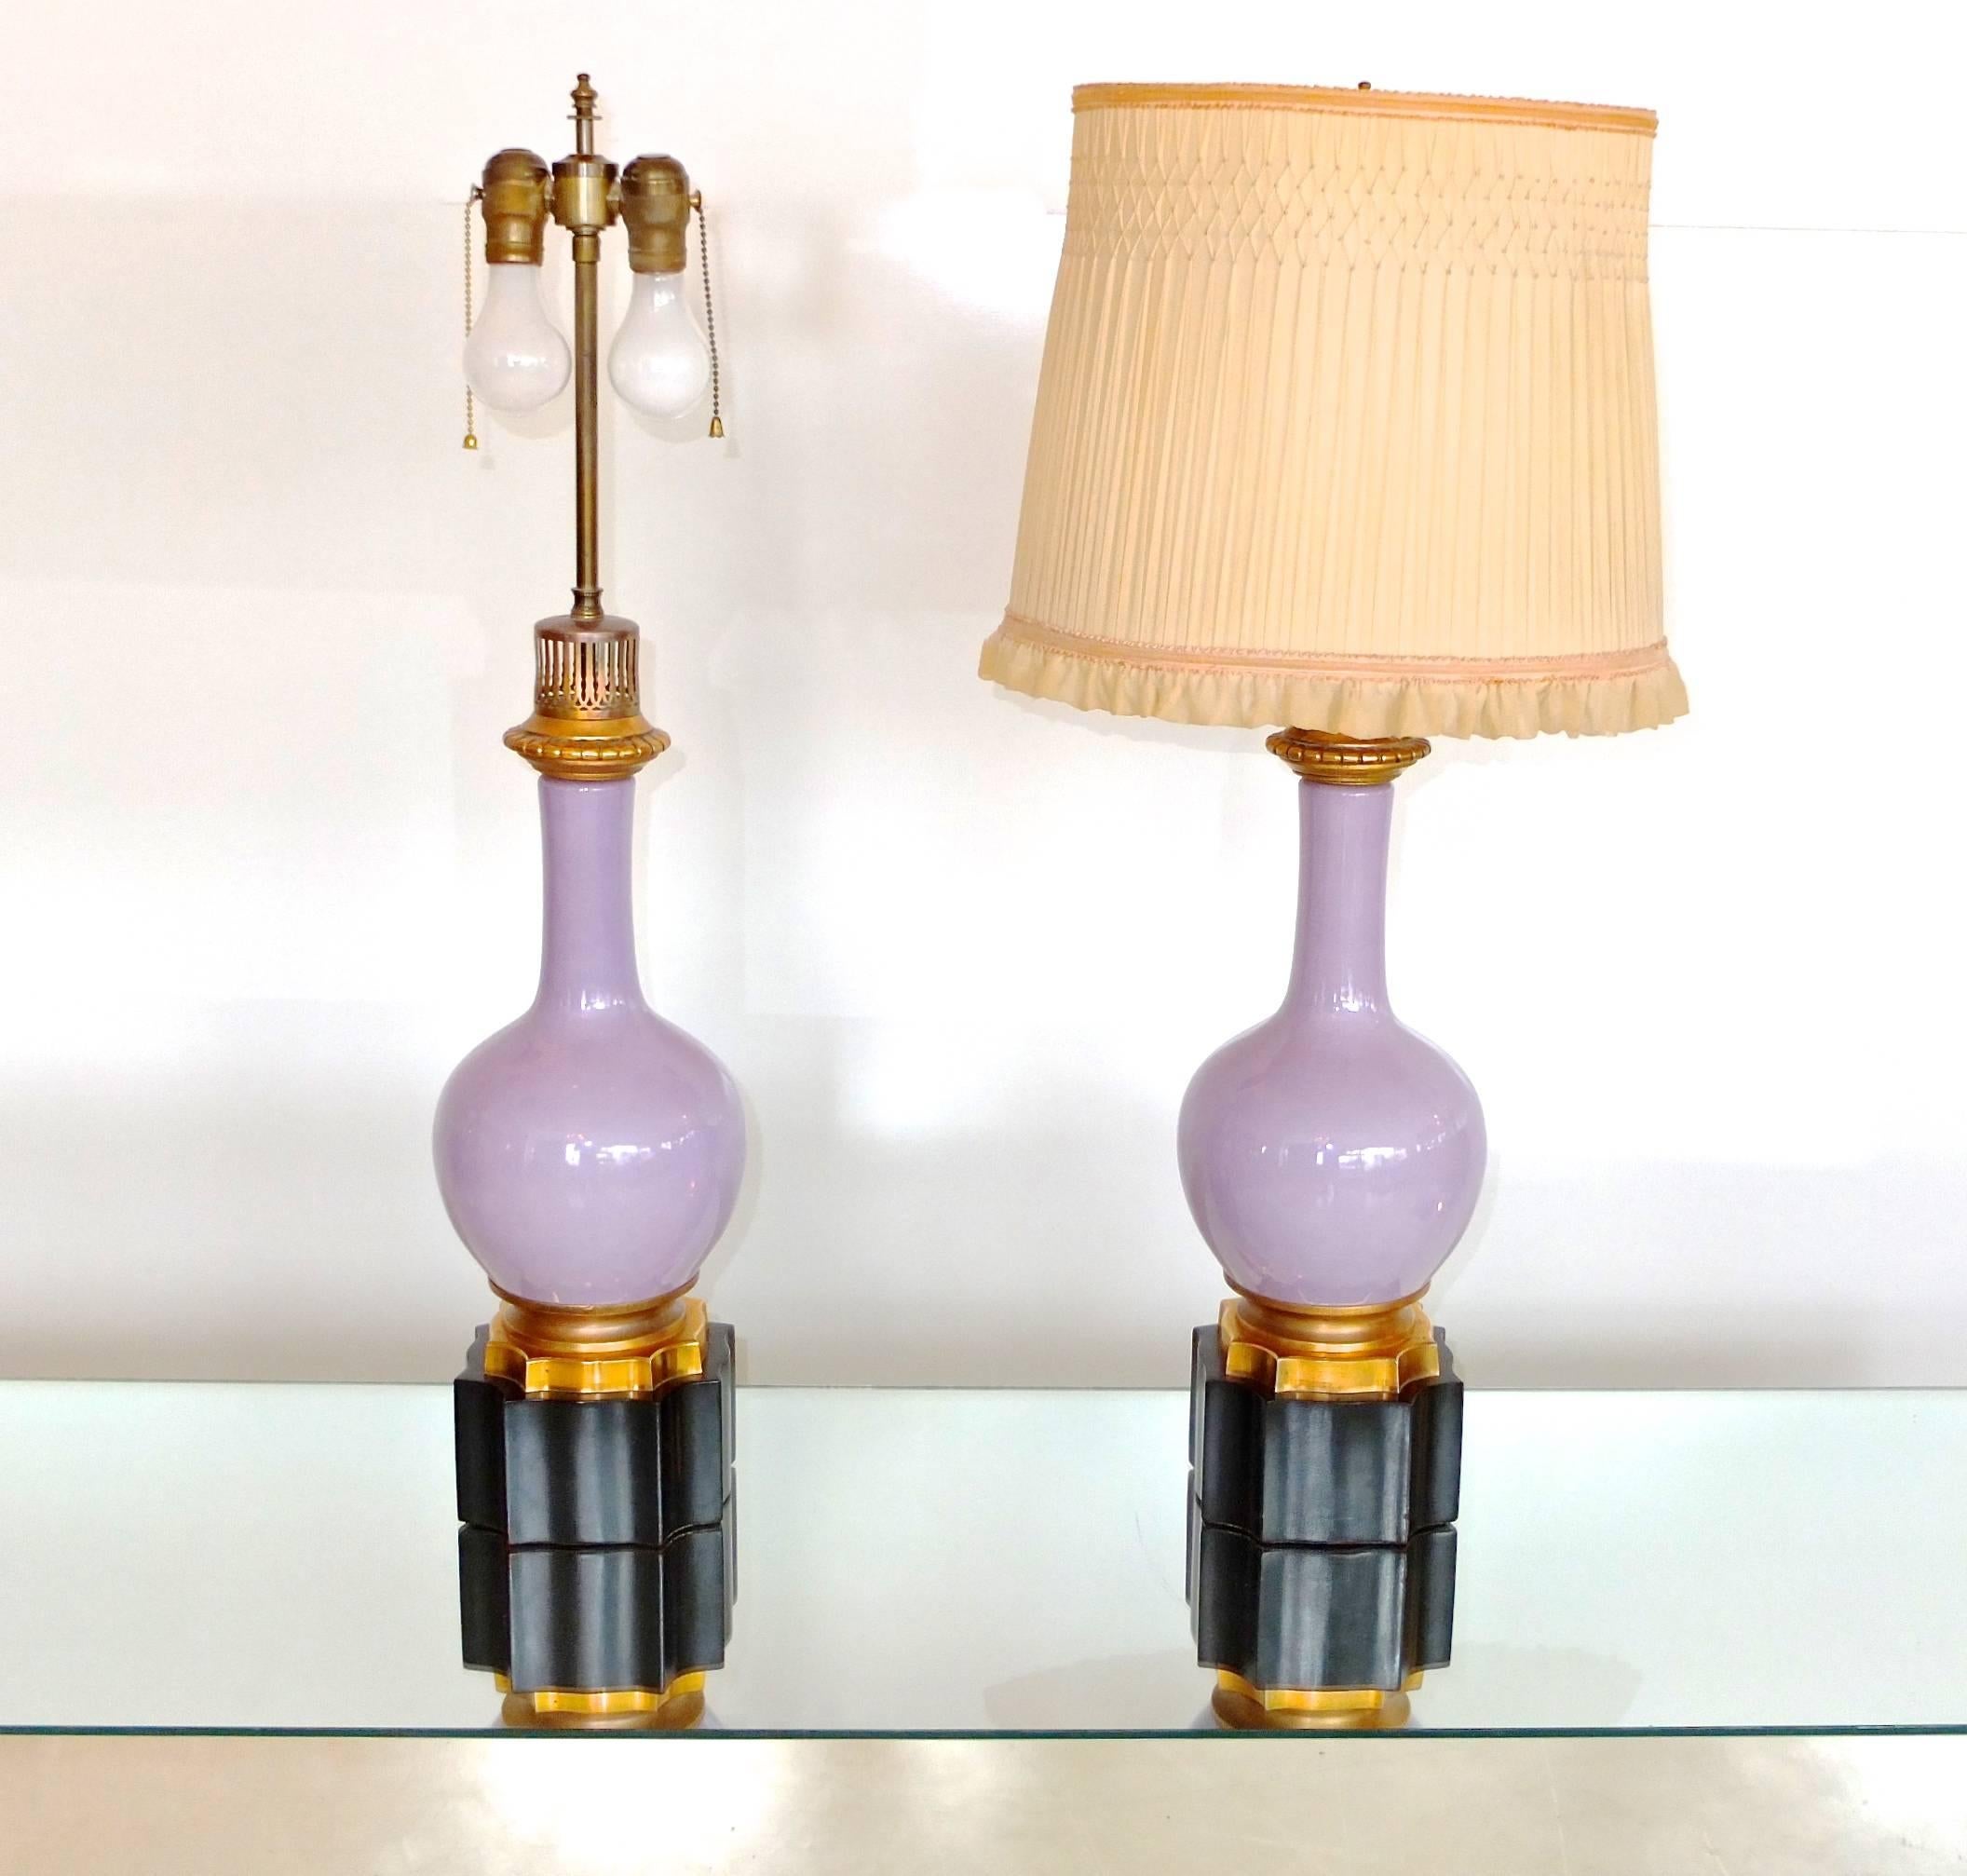 Truly beautiful pair of lamps. Lilac purple porcelain bottle form vases on ormolu mounts standing on octagonal black onyx base.

Brass double cluster lamping with adjustable height shade stem. On/Off by pull chain or cord switch.

These lamps were